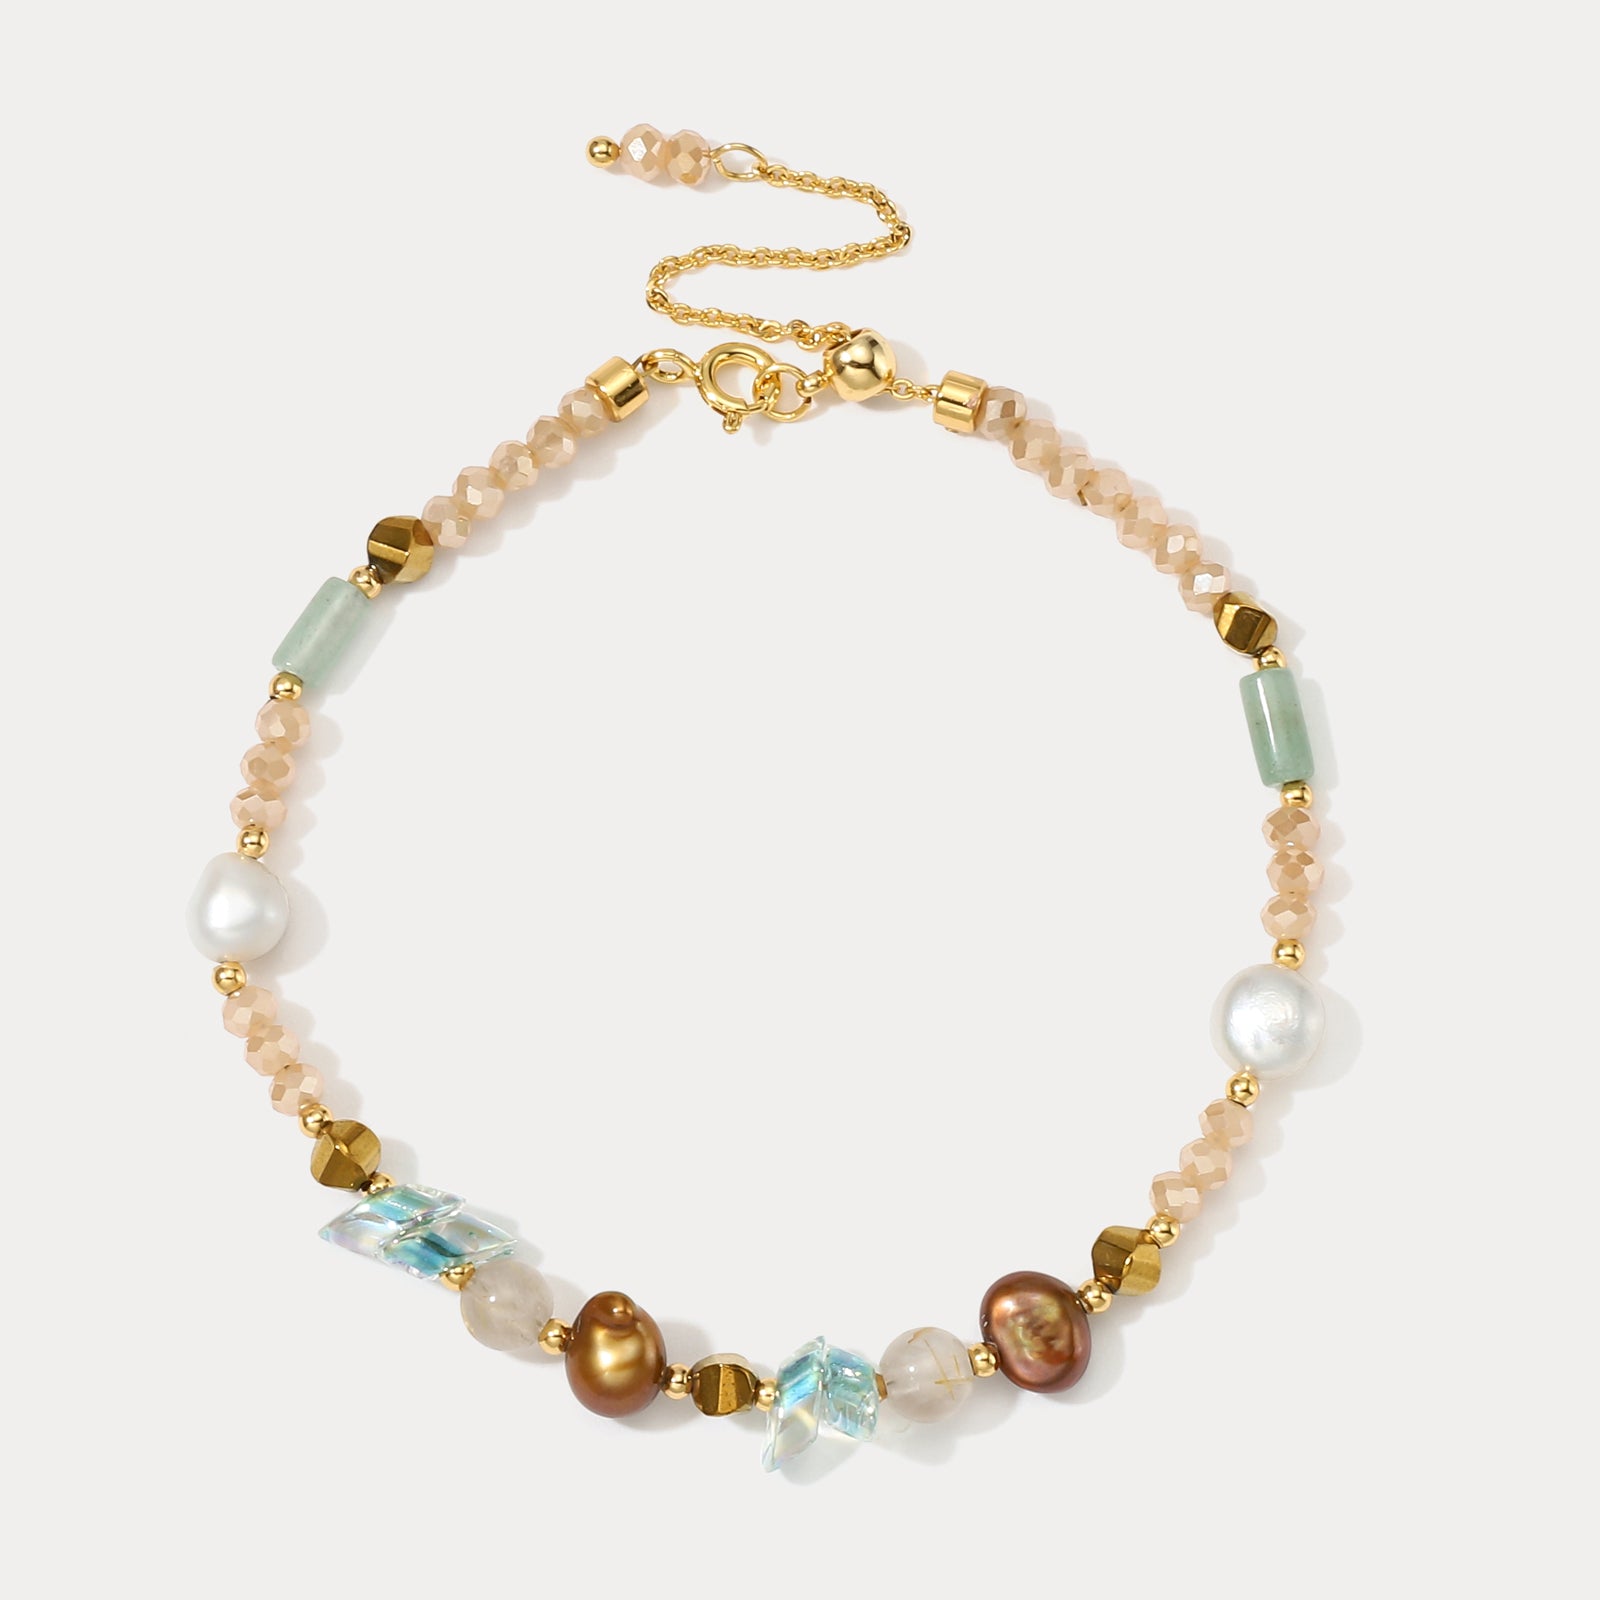 Colorful Natural Stone Beaded Bracelet